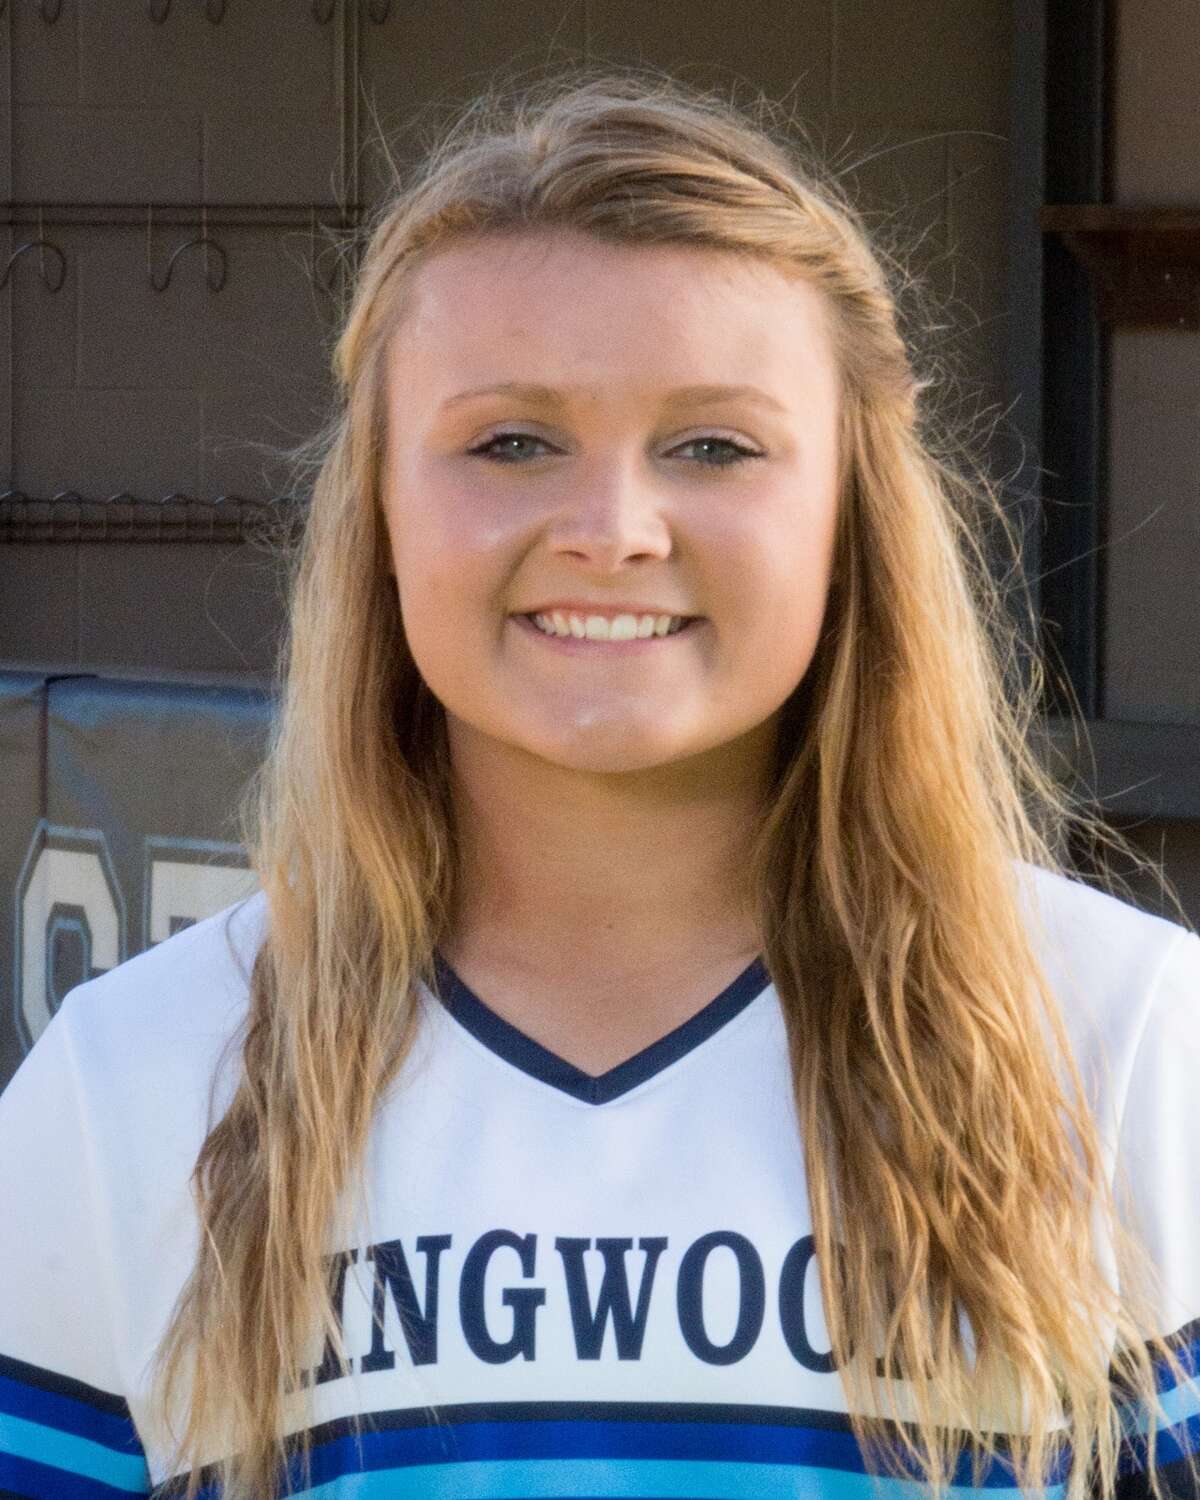 The sophomore Baylor pledge nabbed two complete-game wins against Cedar Ridge with a combined 28 strikeouts in 17 innings. Kingwood is in the regional quarterfinals against Austin Bowie.